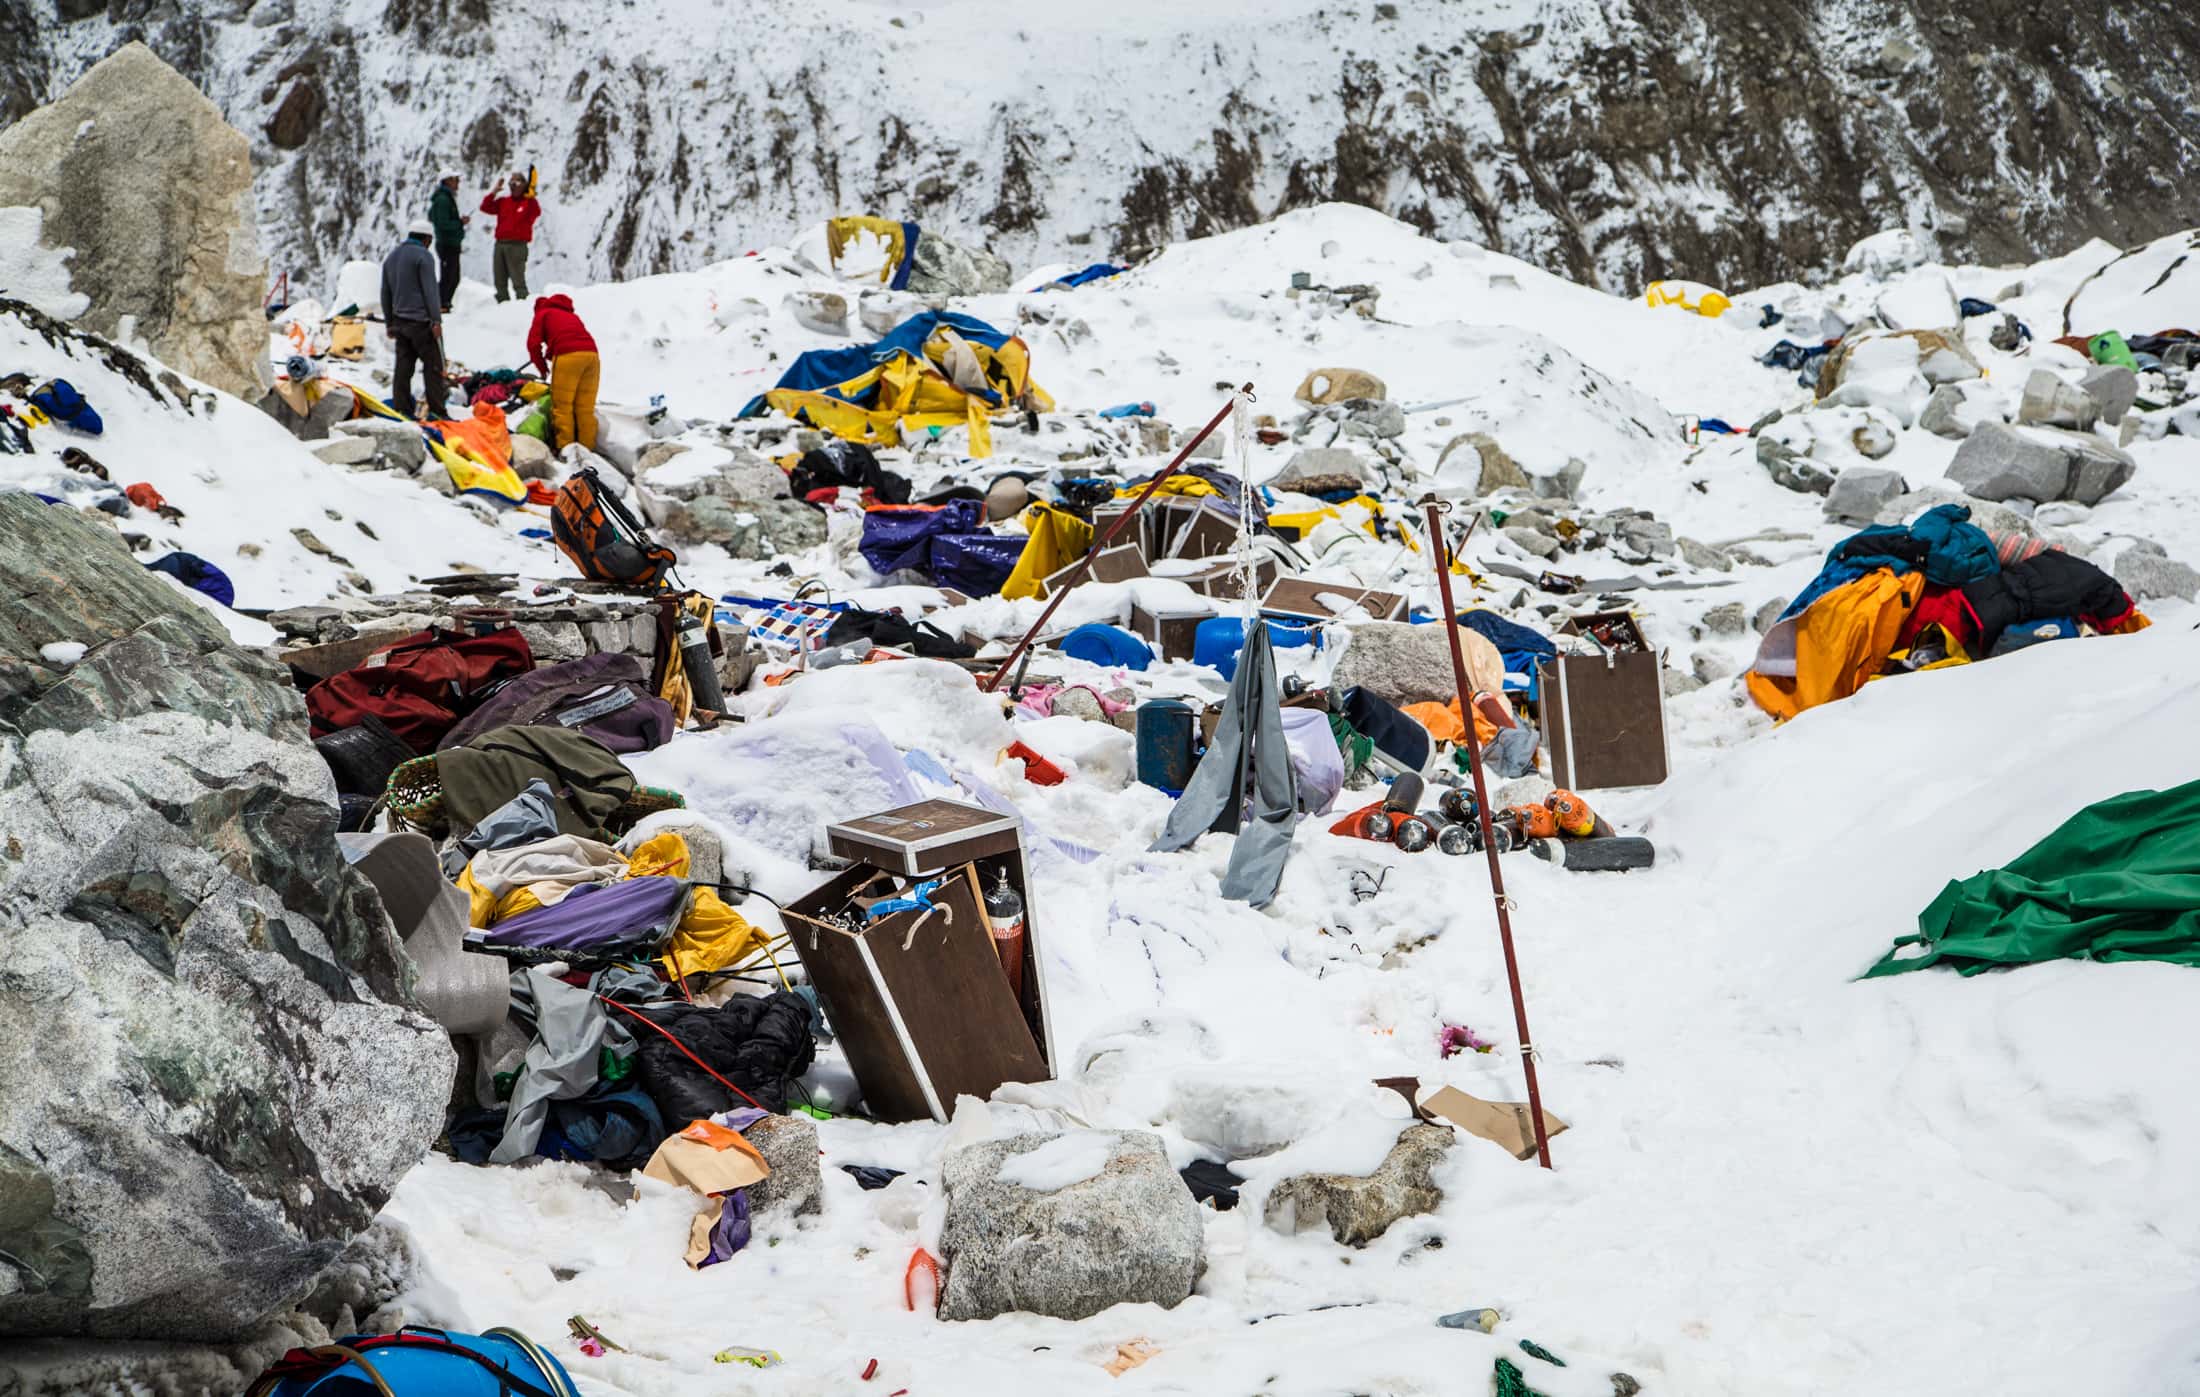 Mount Everest Corpses / MOUNT EVEREST BODIES — Steemit : In 2012, cbc news reported that there ...